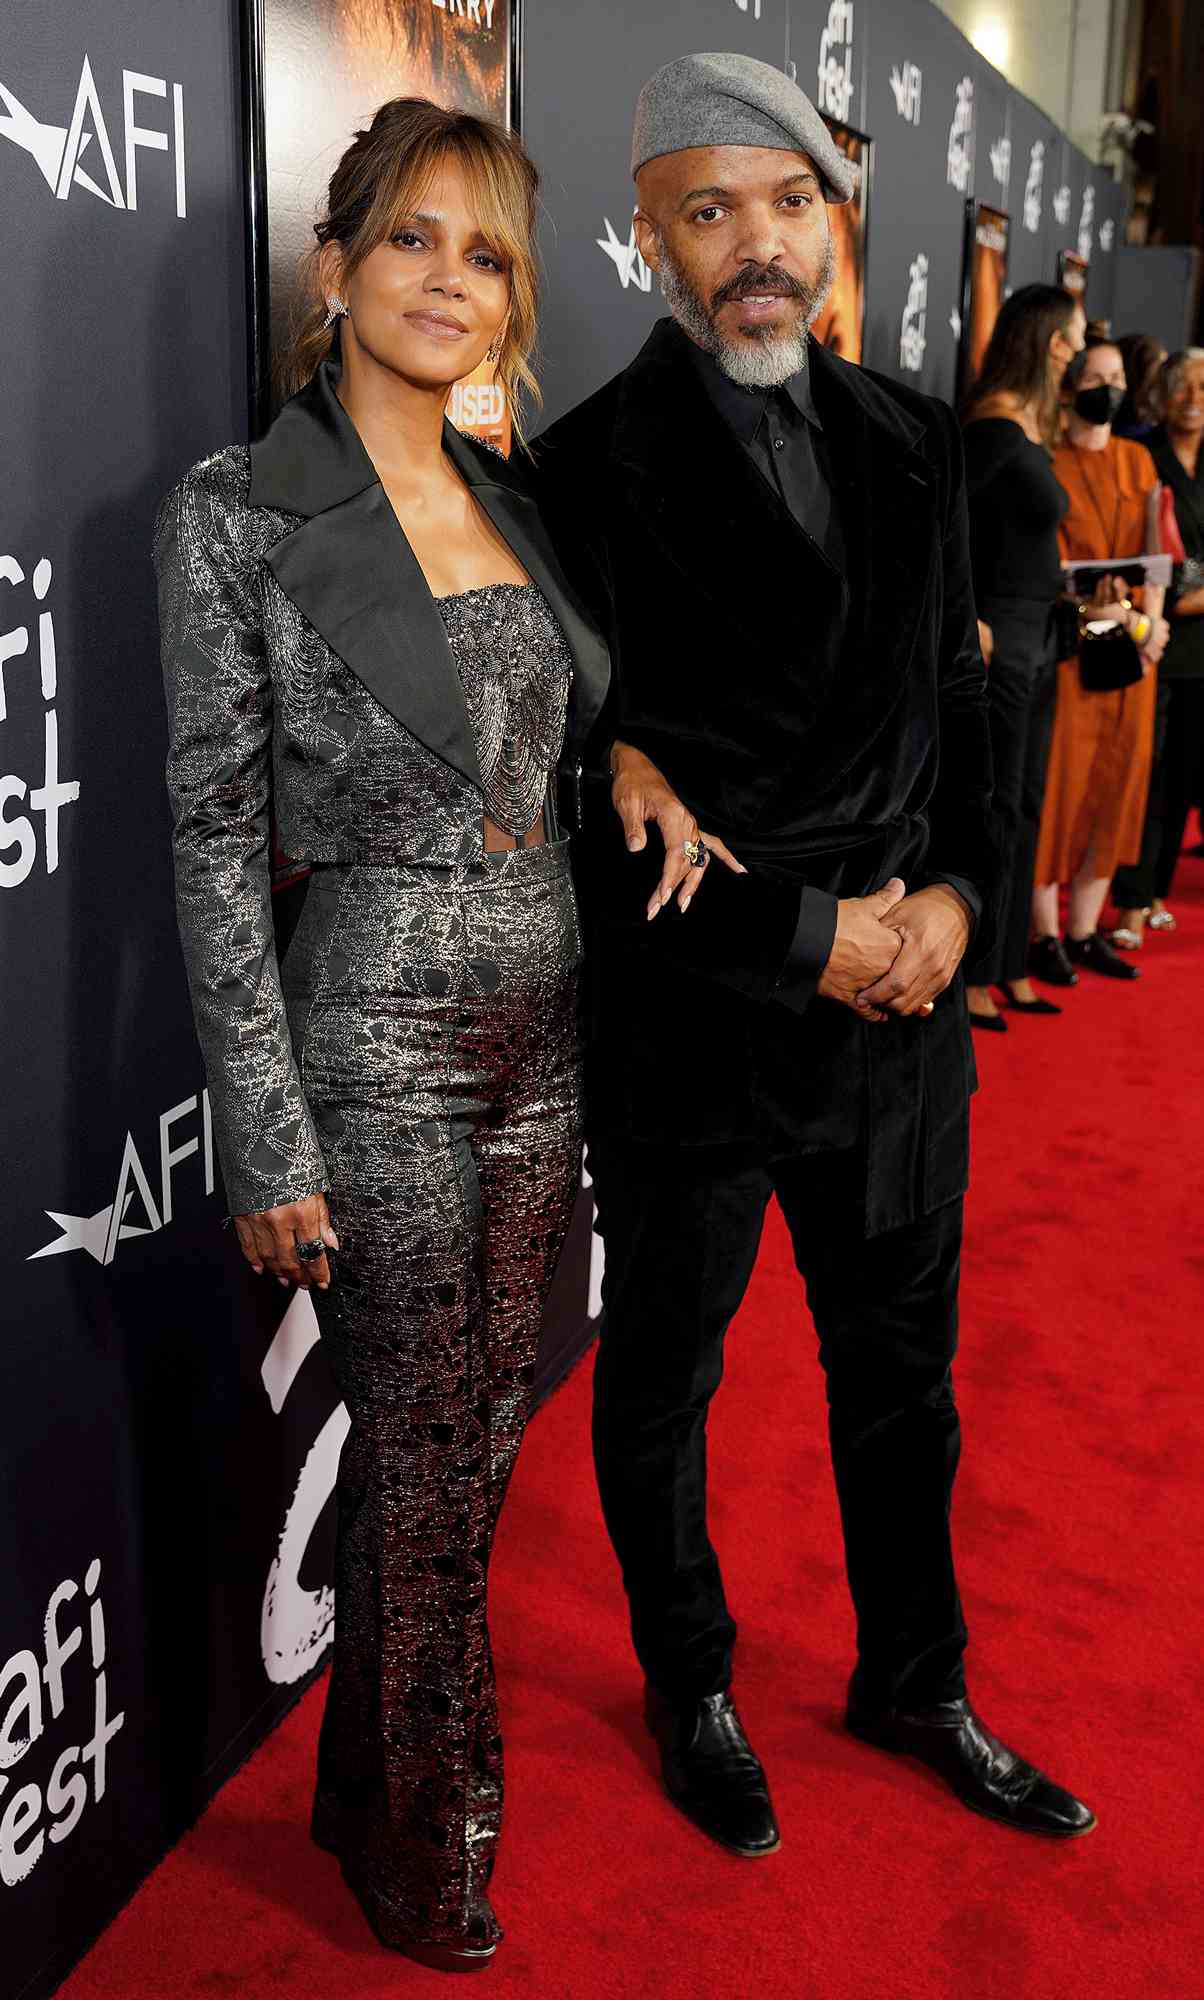 Halle Berry (L) and Van Hunt attend the 2021 AFI Fest Official Screening of Netflix's "Bruised" at TCL Chinese Theatre on November 13, 2021 in Hollywood, California